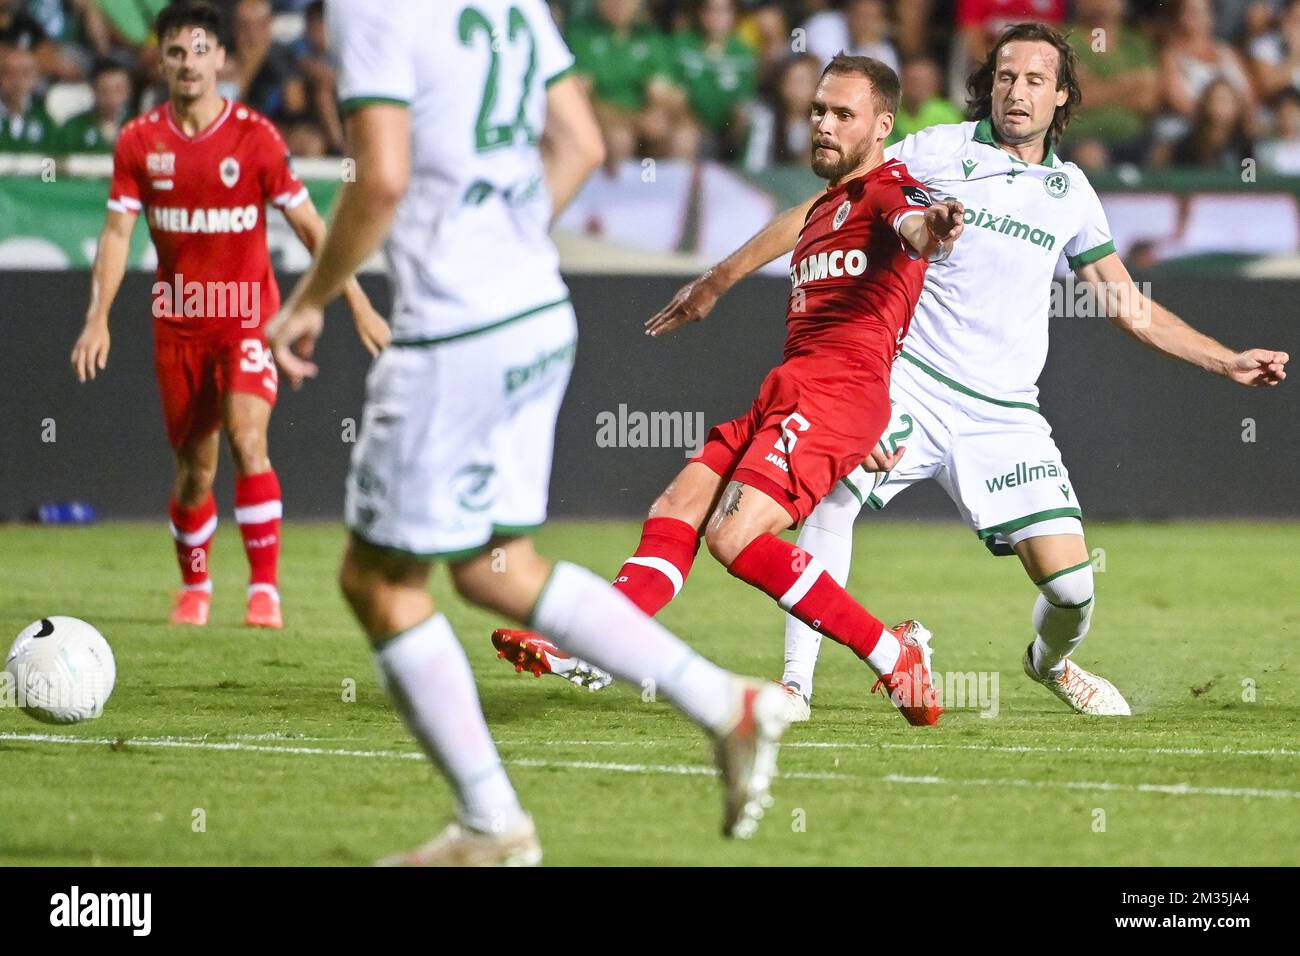 Antwerp's Birger Verstraete and Omonoia's Mikkel Diskerud fight for the ball during the match between Belgian soccer team Royal Antwerp FC and Omonia Nicosia, the first leg of the play-off for the Europea League competition, in Nicosia, Cyprus, Thursday 19 August 2021. BELGA PHOTO LAURIE DIEFFEMBACQ Stock Photo